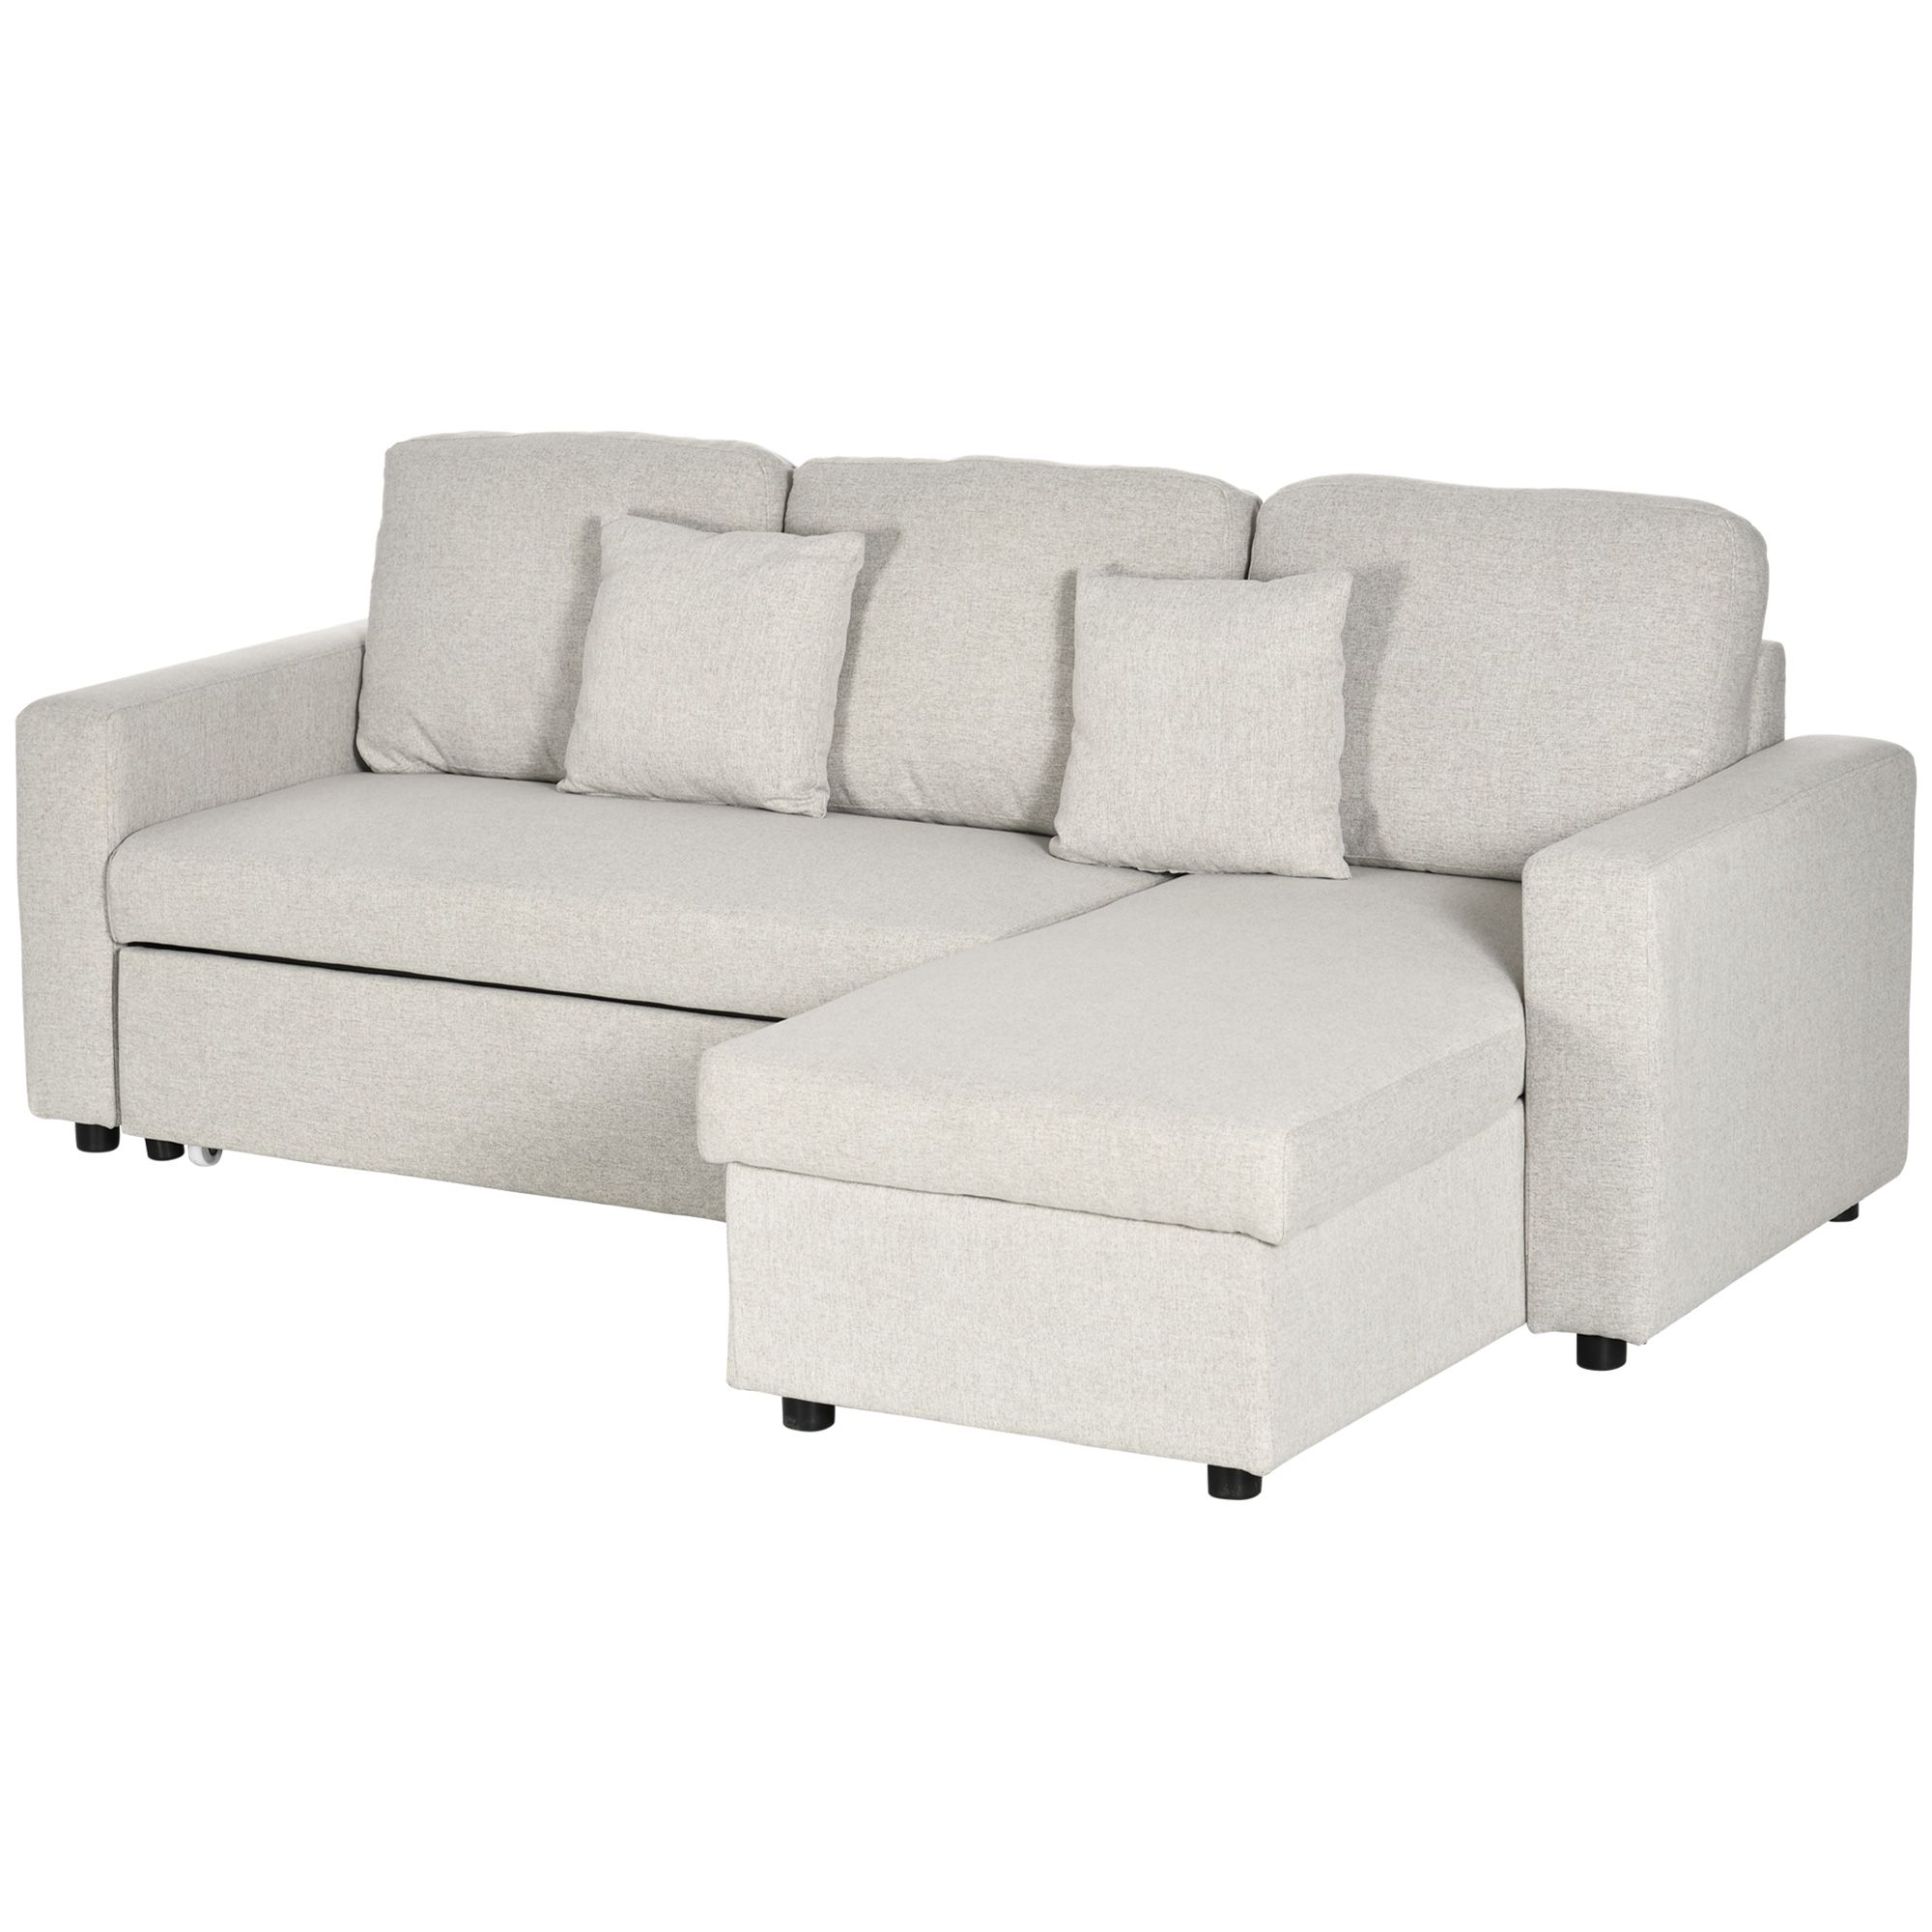 Homcom Sectional Sleeper Sofa, Linen Fabric L Shaped Couch With Pull Out  Bed, Reversible Storage Chaise For Living Room, Apartment, 3 Seat, Cream  White | Aosom Regarding Chaise 3 Seat L Shaped Sleeper Sofas (View 18 of 20)